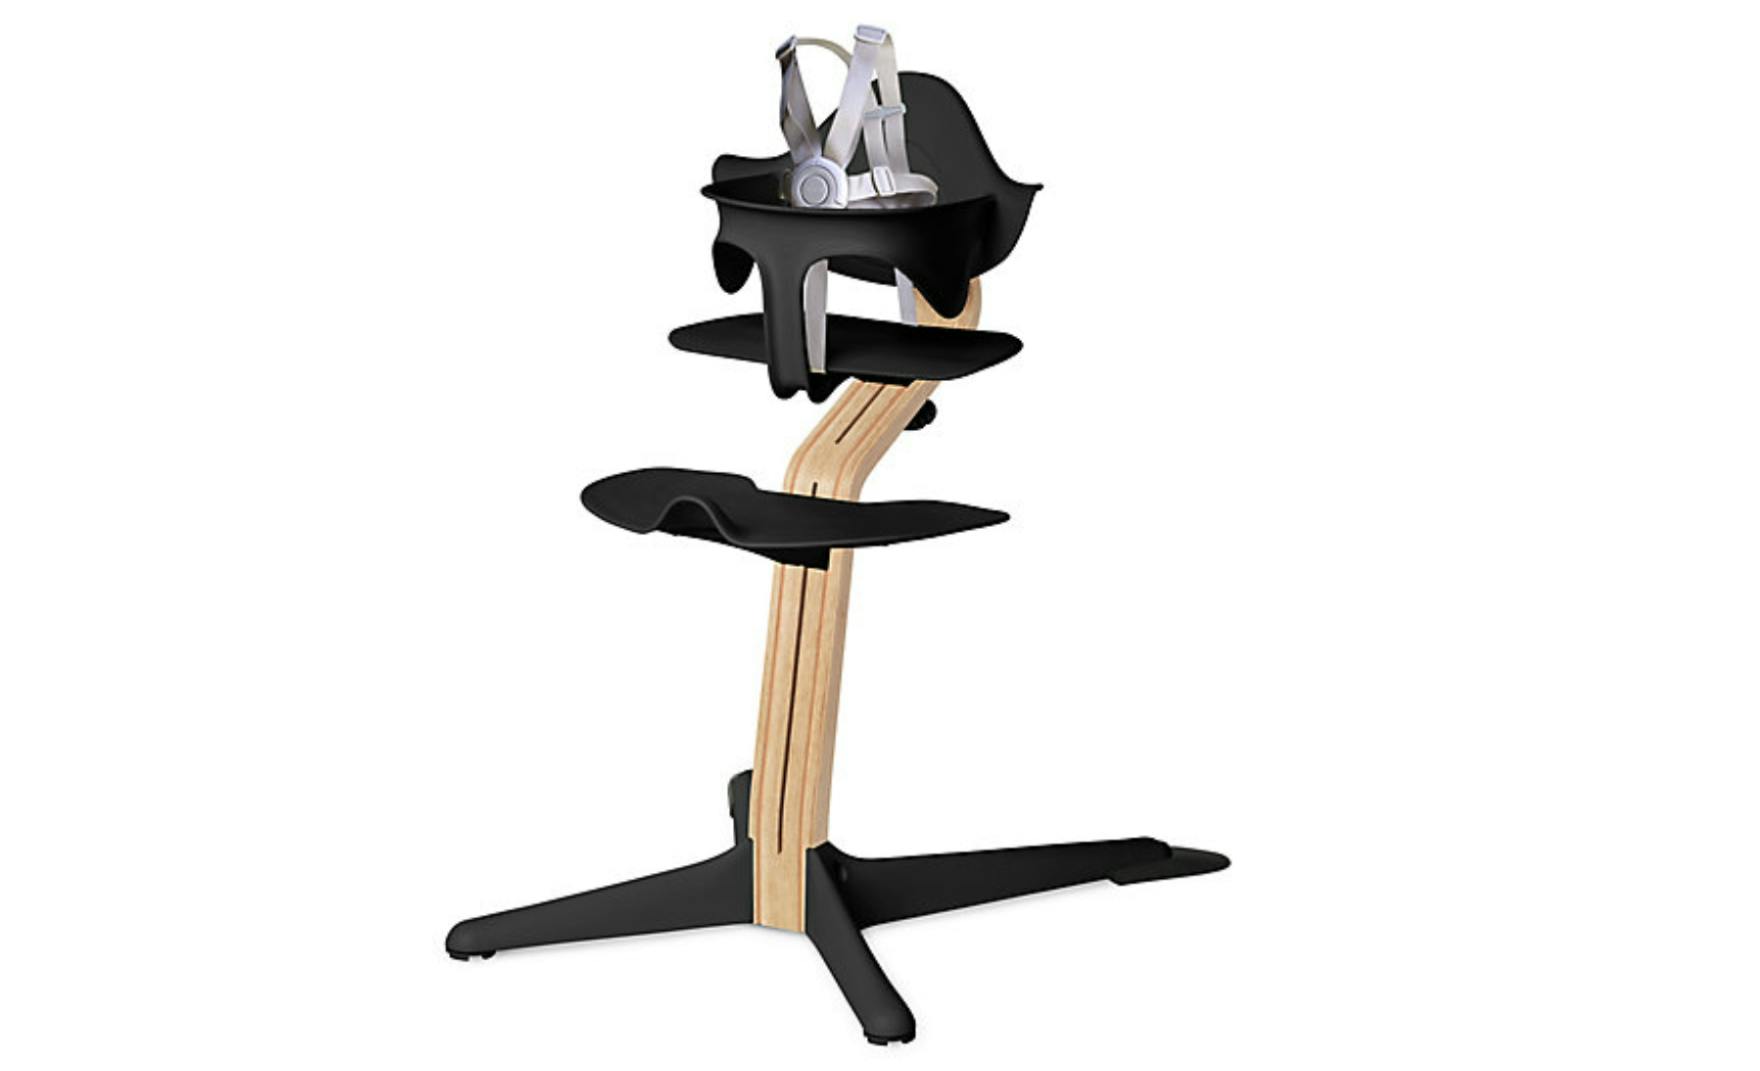 The Nomi High Chair.